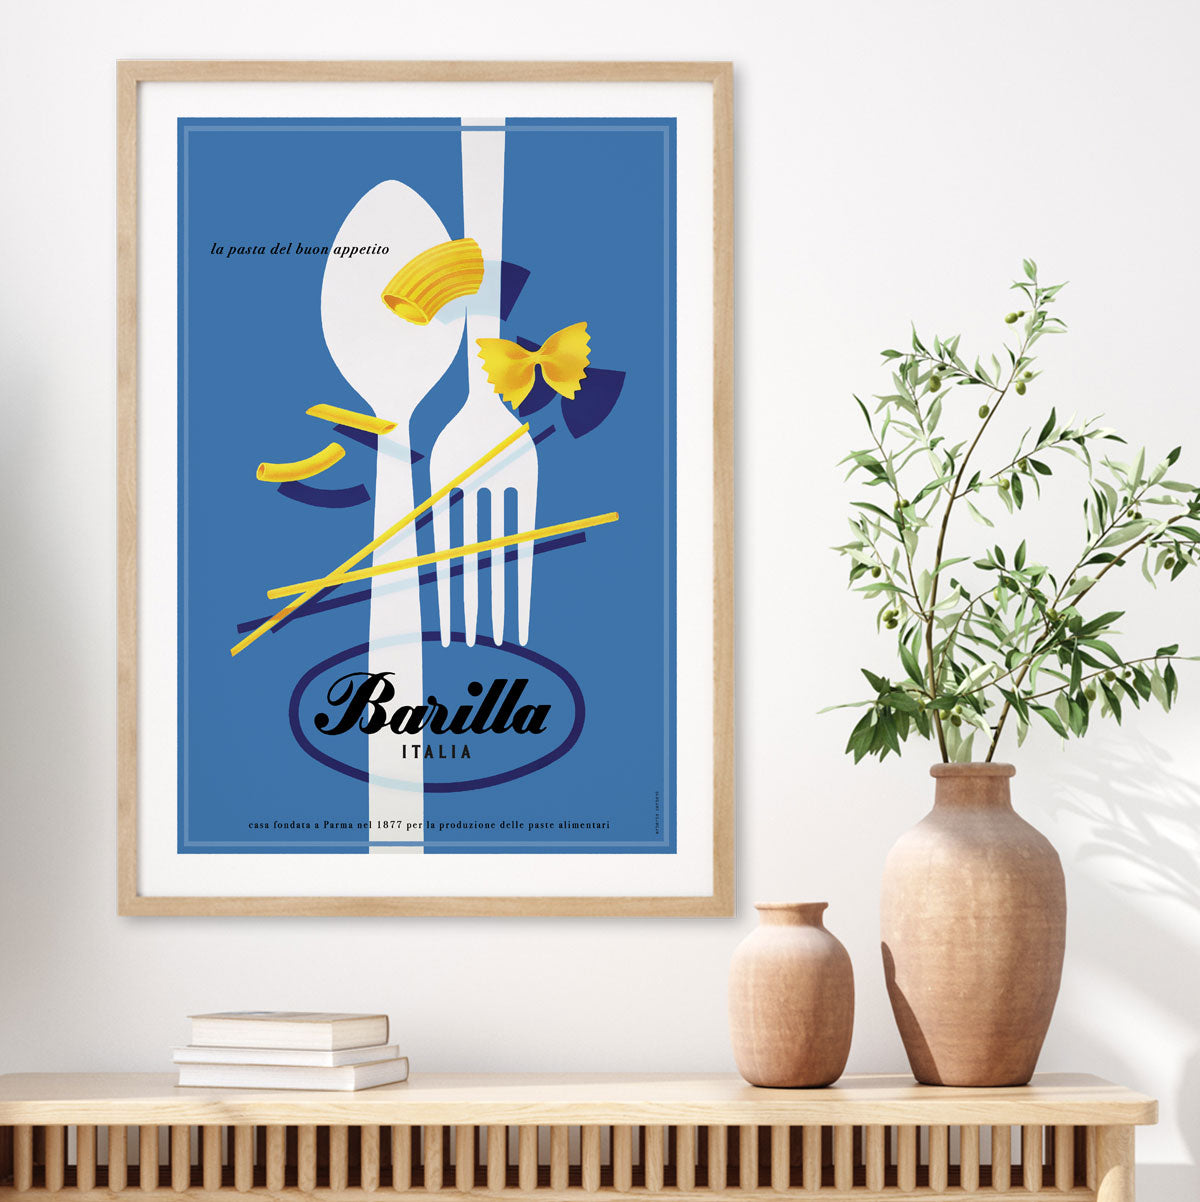 Italian pasta retro vintage advertising poster from Places We Luv